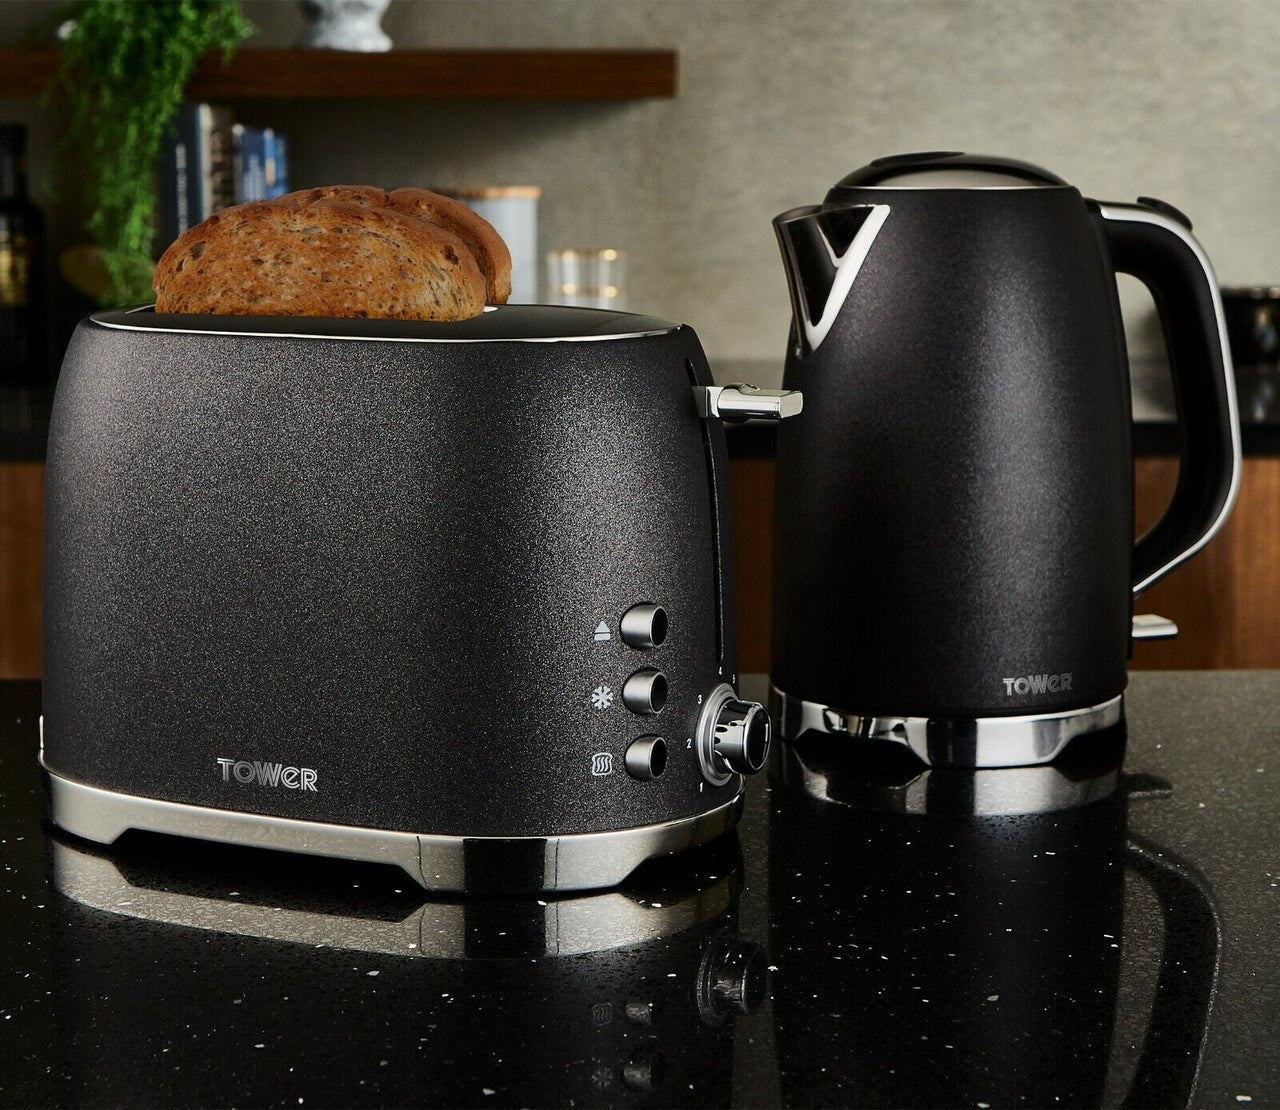 Tower Glitz Kettle, 2-Slice Toaster & Tea, Coffee, Sugar Canisters 3 Set in Black